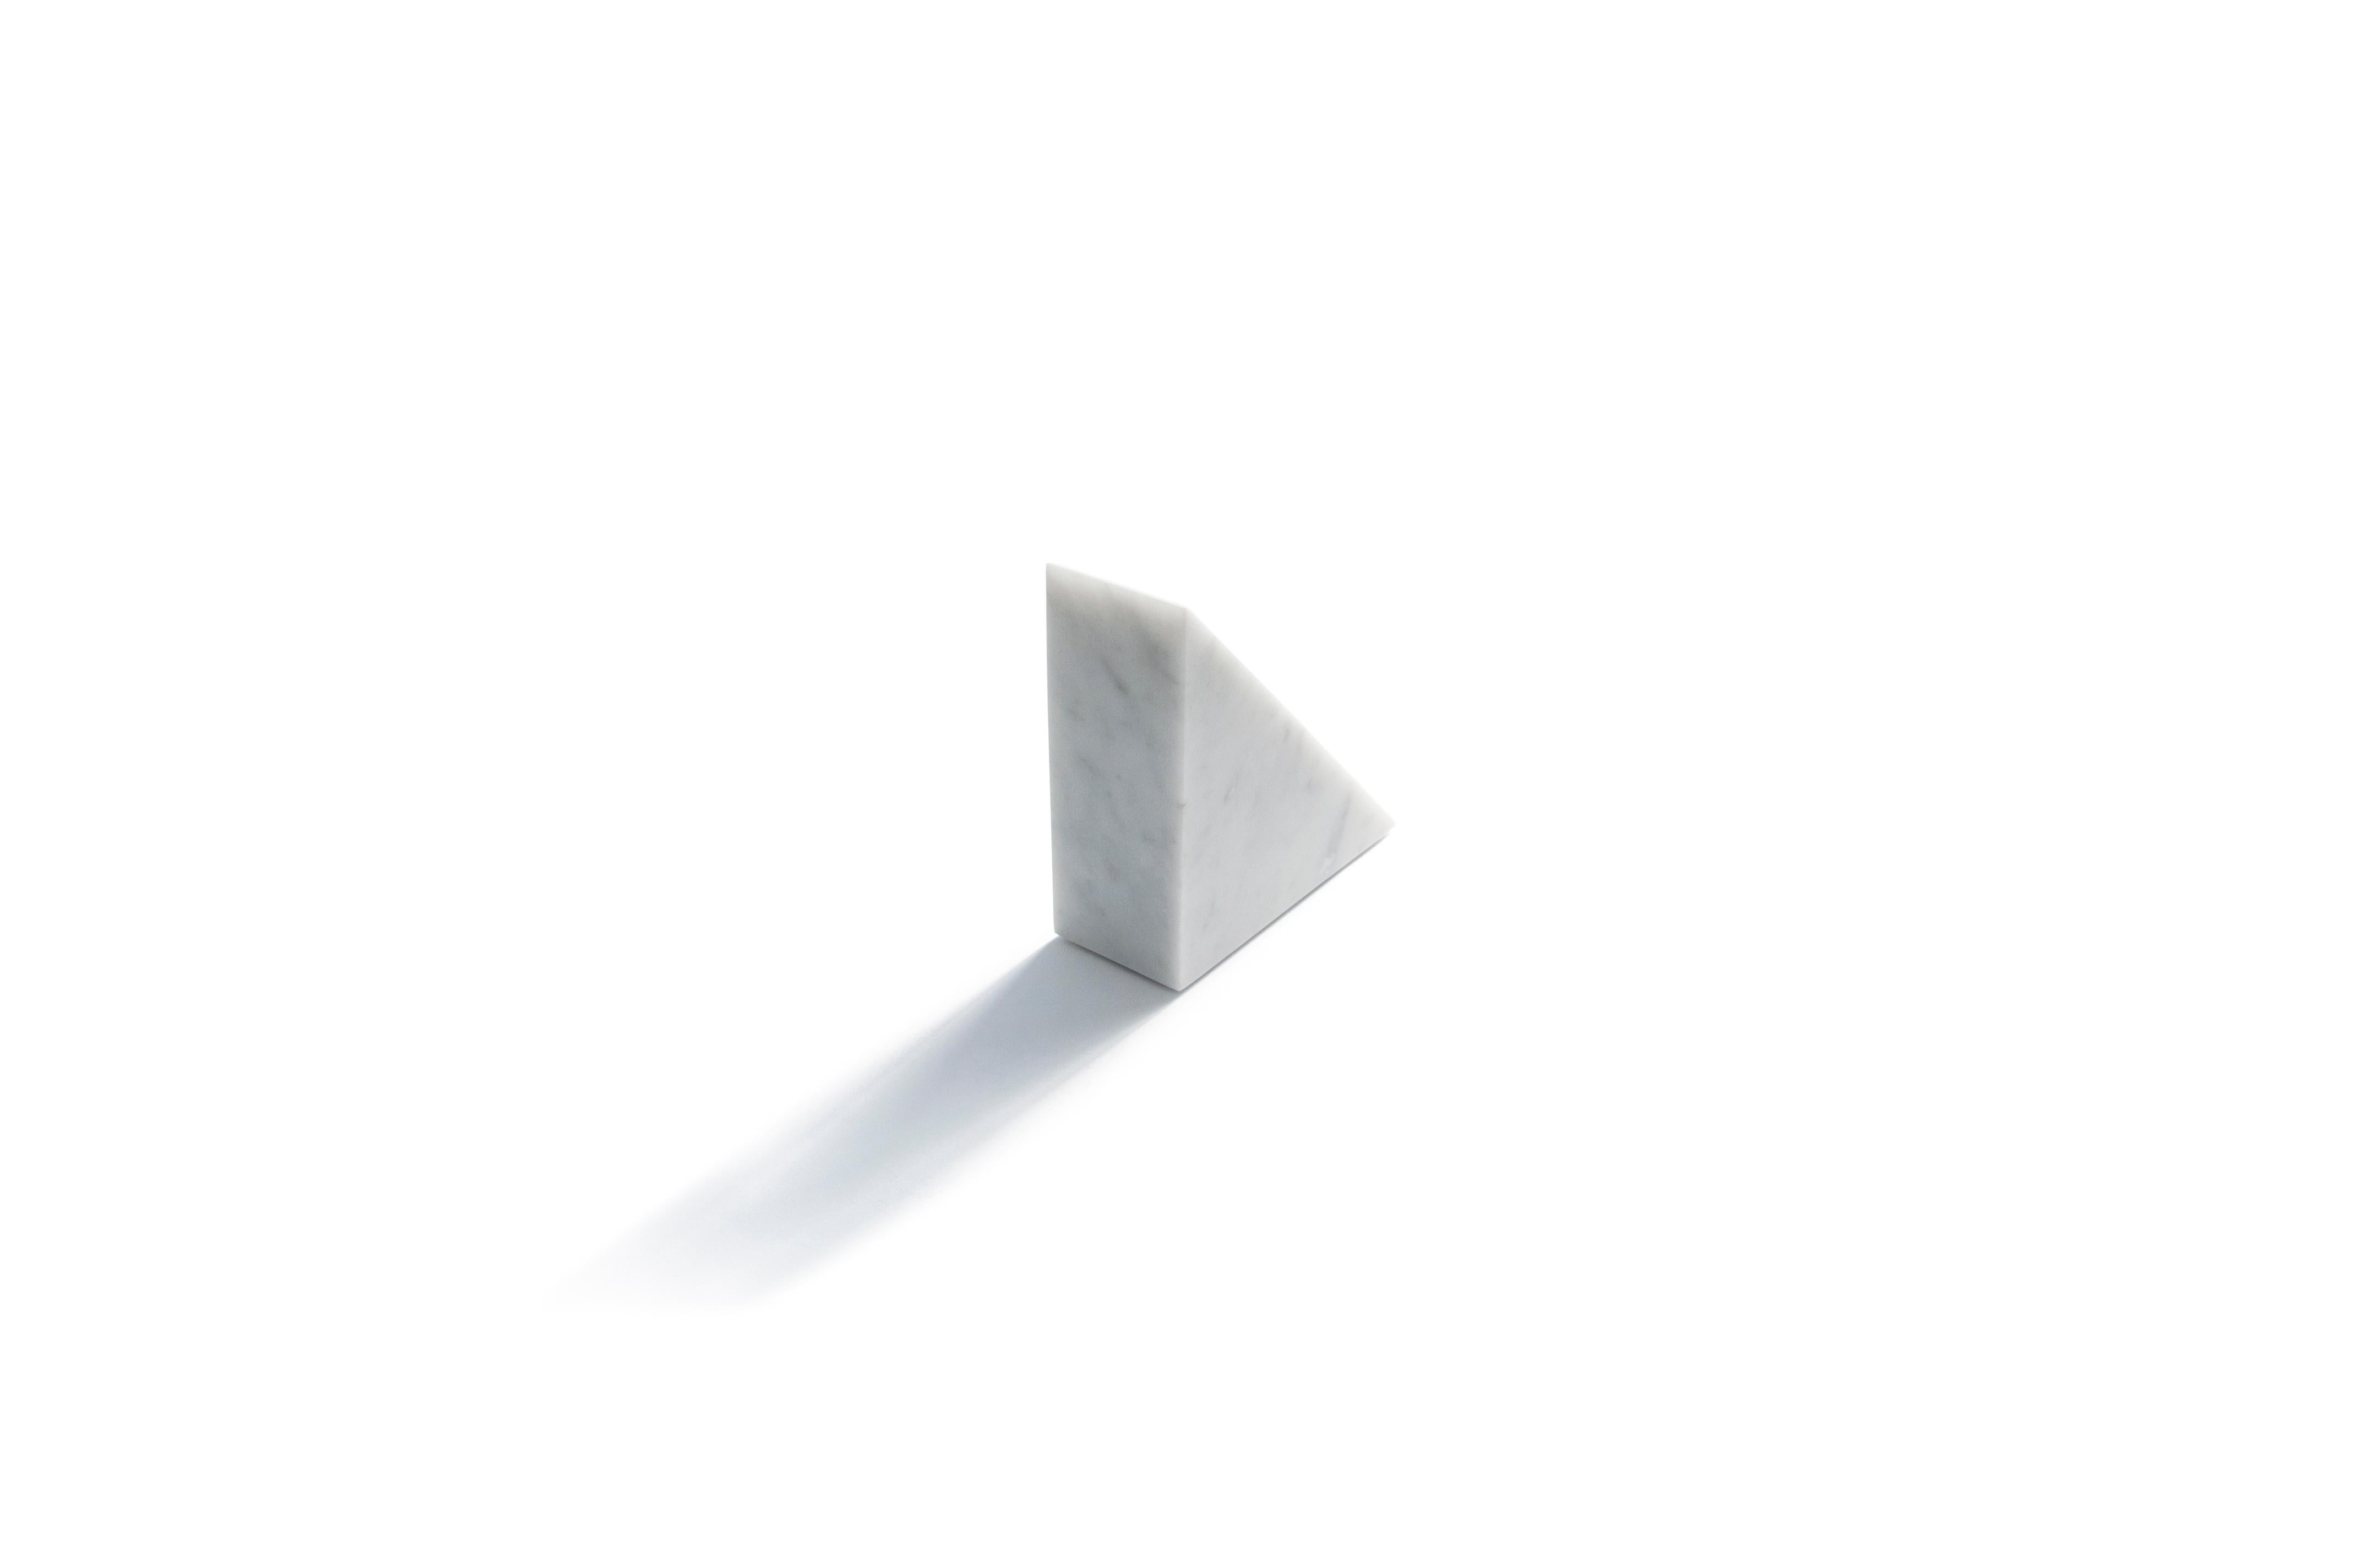 Hand-Crafted Handmade Big Bookend with Triangular Shape in Satin White Carrara Marble For Sale